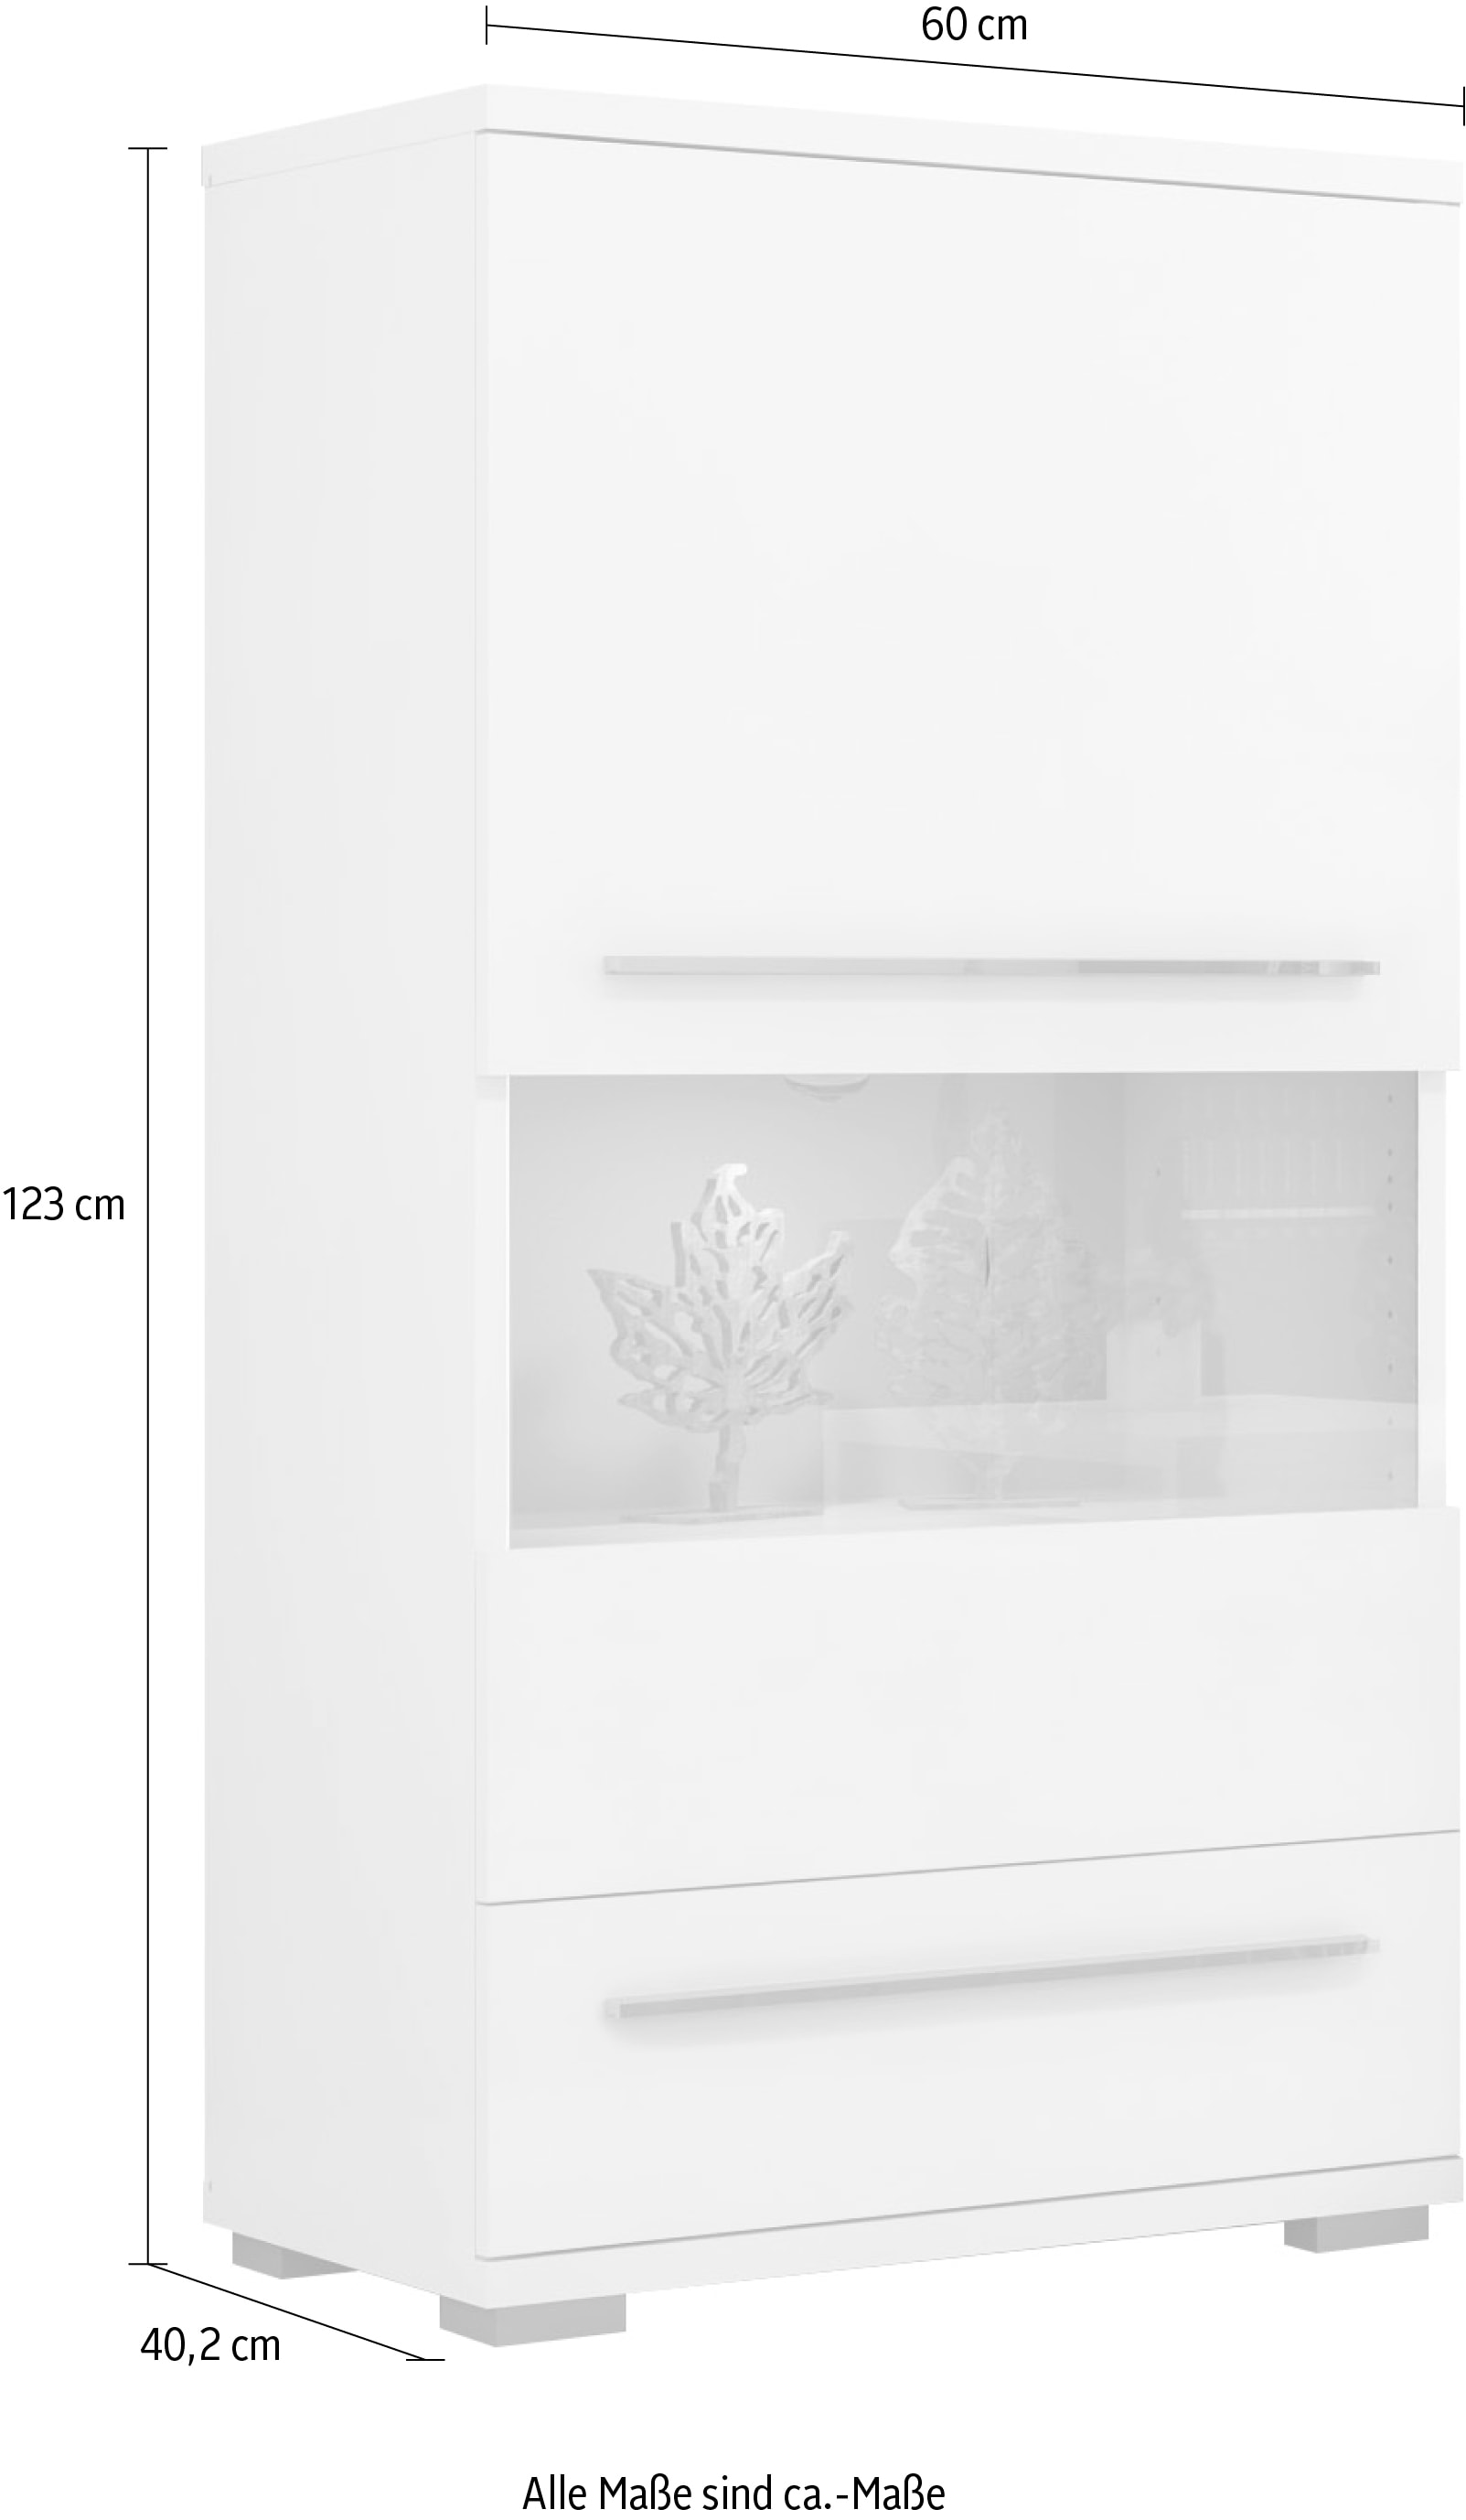 Places of Style Vitrine lackiert, Raten Soft-Close kaufen »Piano«, auf Funktion UV